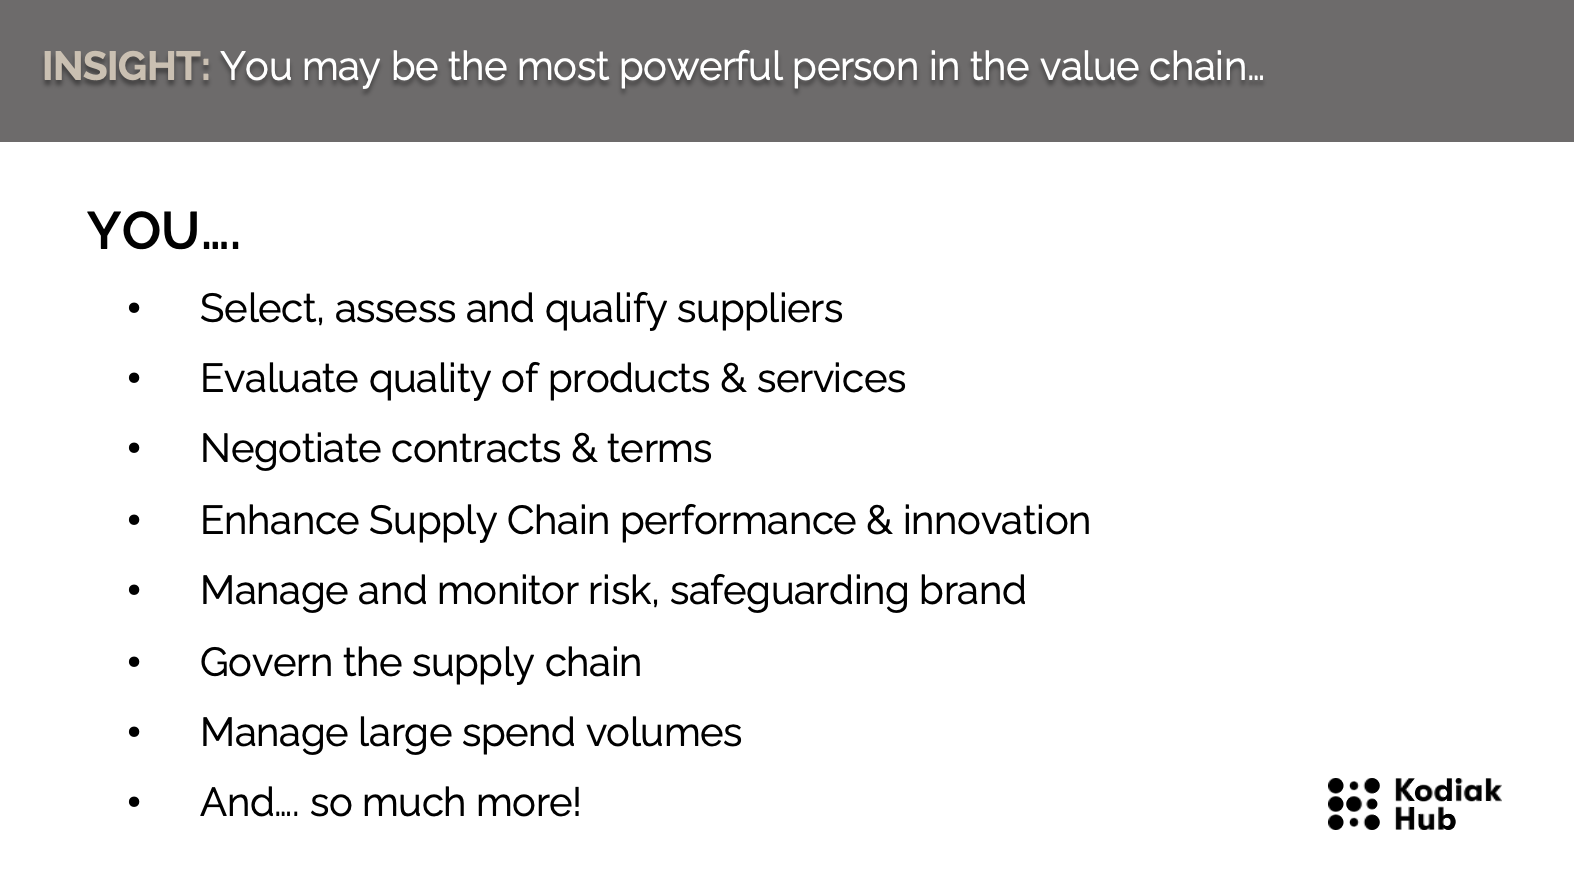 Procurement teams are the most valuable person in the value chain